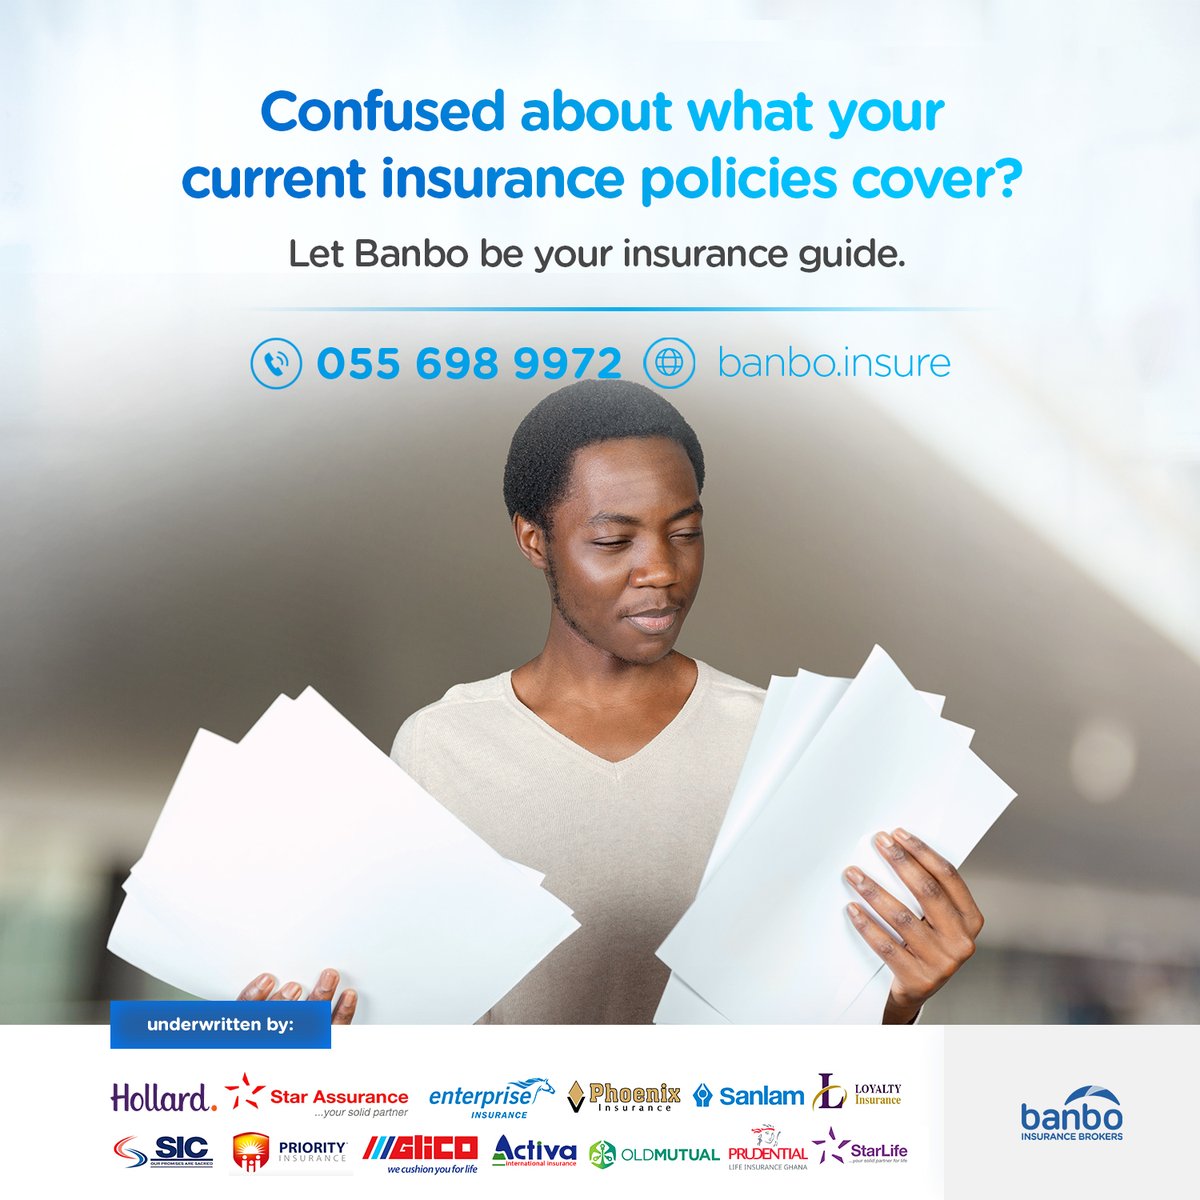 As your brokers, we identify gaps in your insurance coverage to optimize the value you obtain from existing policies and ensure that the necessary areas are covered to prevent or minimize losses. ​

#InsuranceAdvocate #Banbo #HassleFree #ChooseBanbo #WeGiveUMore #InsuranceGhana